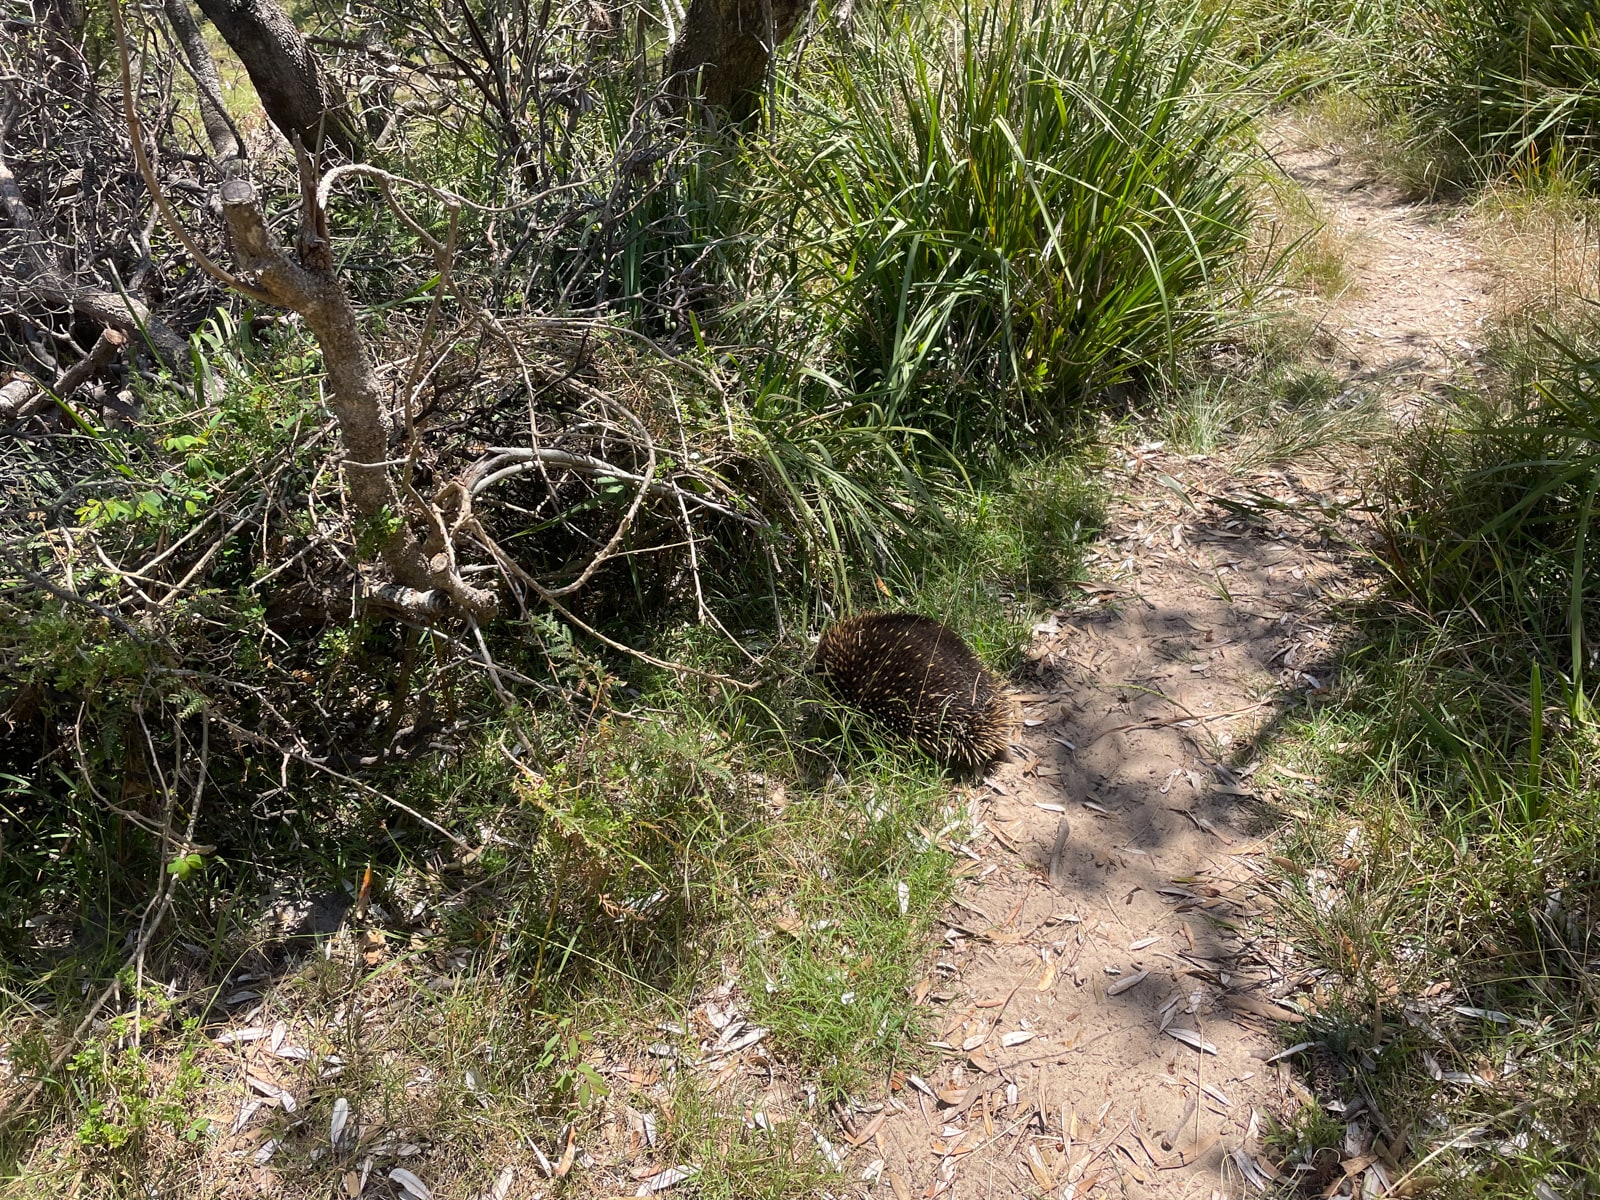 A small echidna crawling into the grass at the side of a walking trail